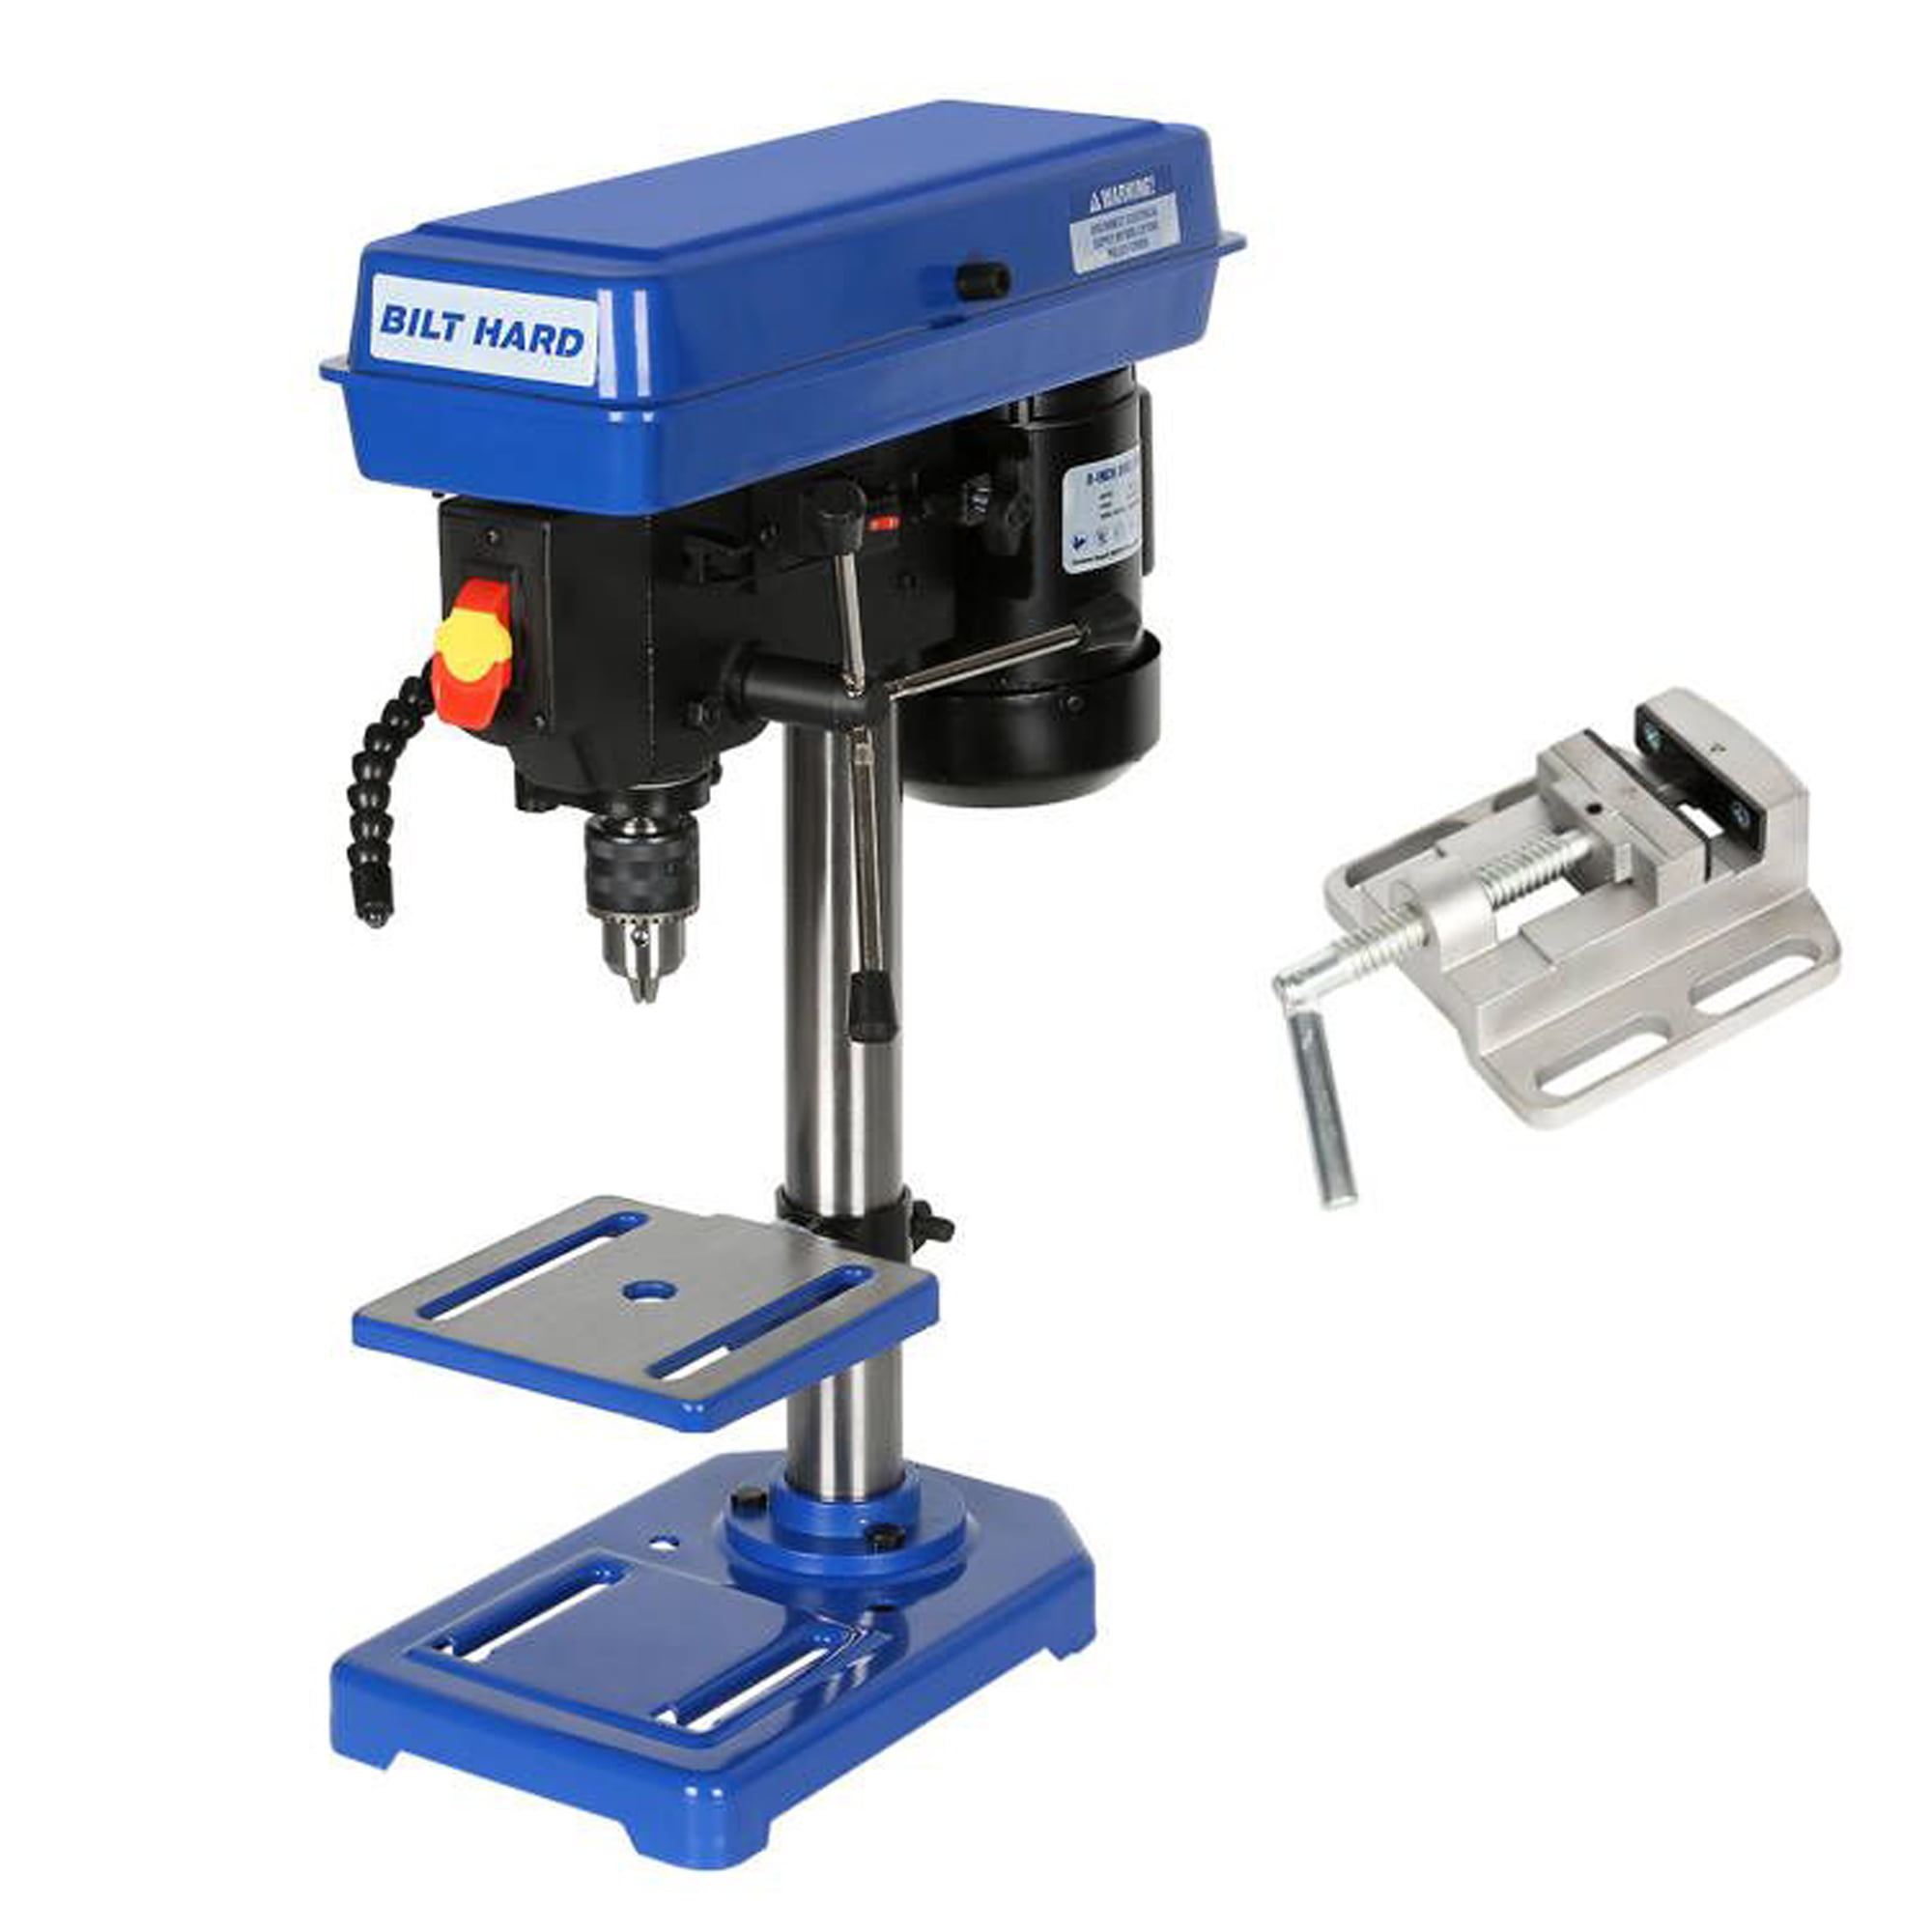 Mini Bench Drill Press Machine with High Speed Adjustable Mini Bench Press Machine Life up 2021 The Best Woodworking Drill Locator Woodpeckers Auto-line Drill Guide